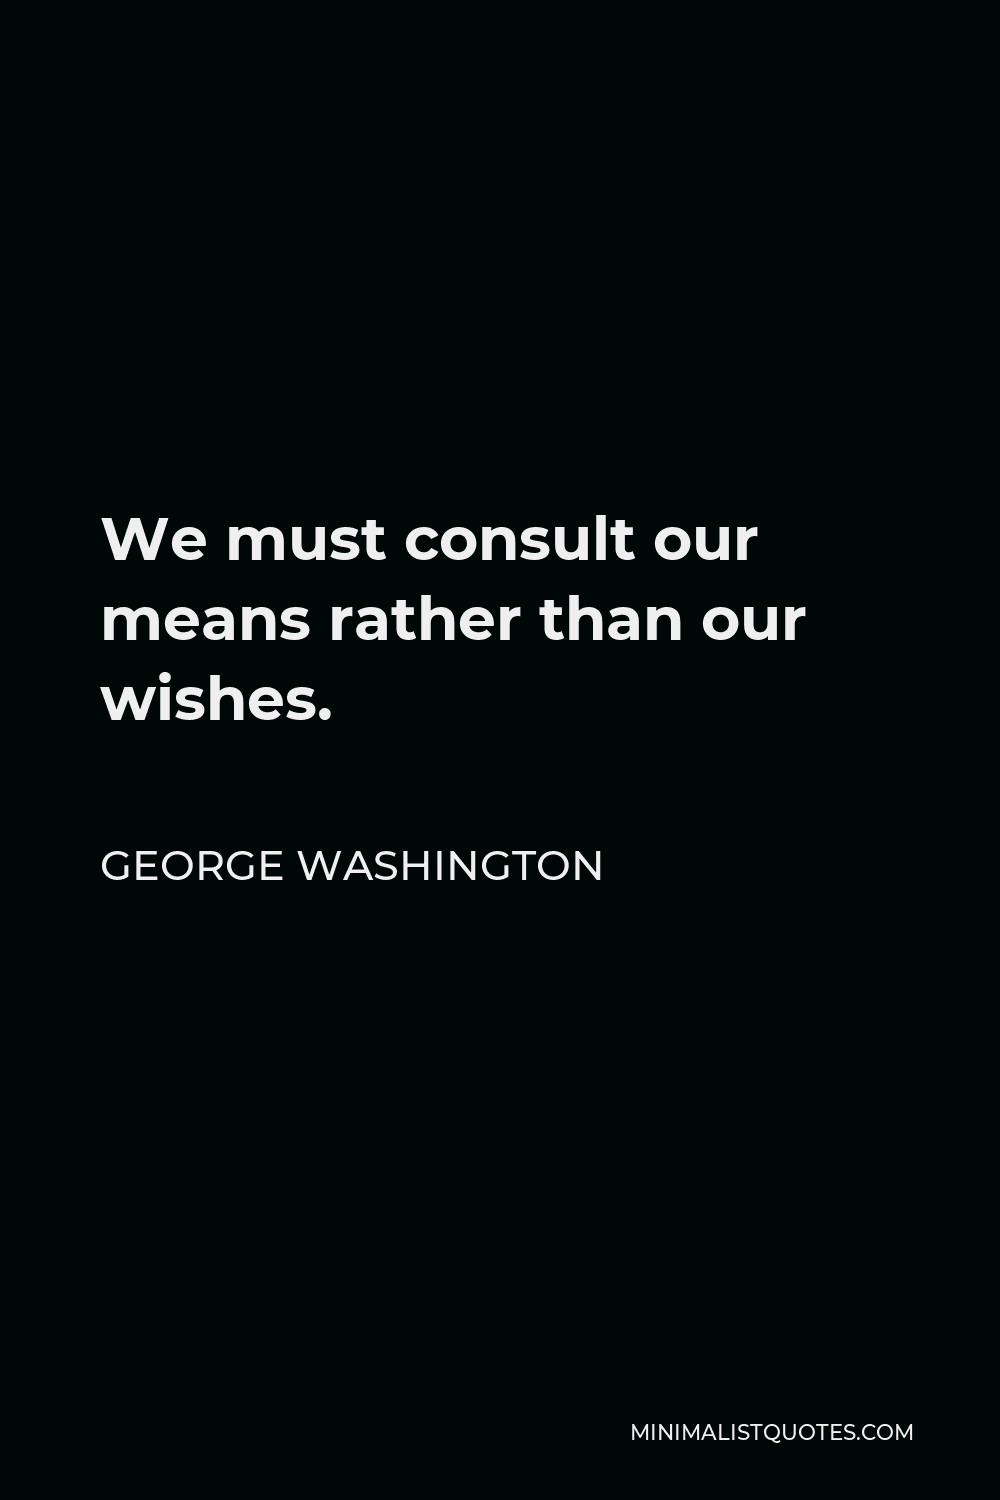 George Washington Quote - We must consult our means rather than our wishes.